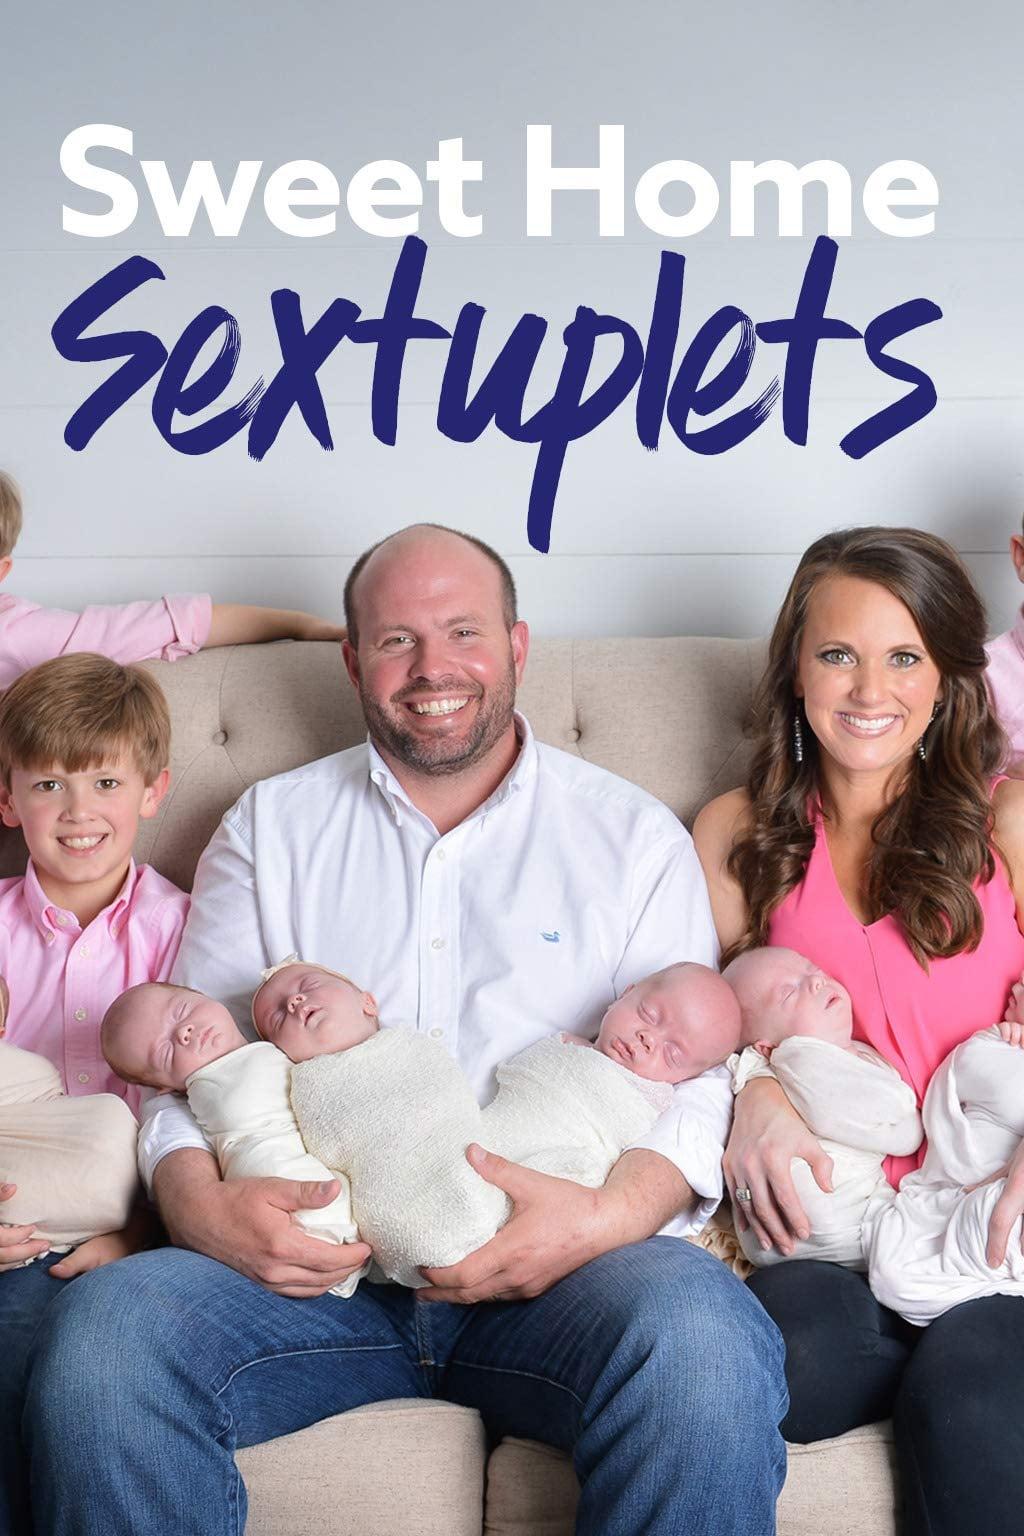 Sweet Home Sextuplets poster